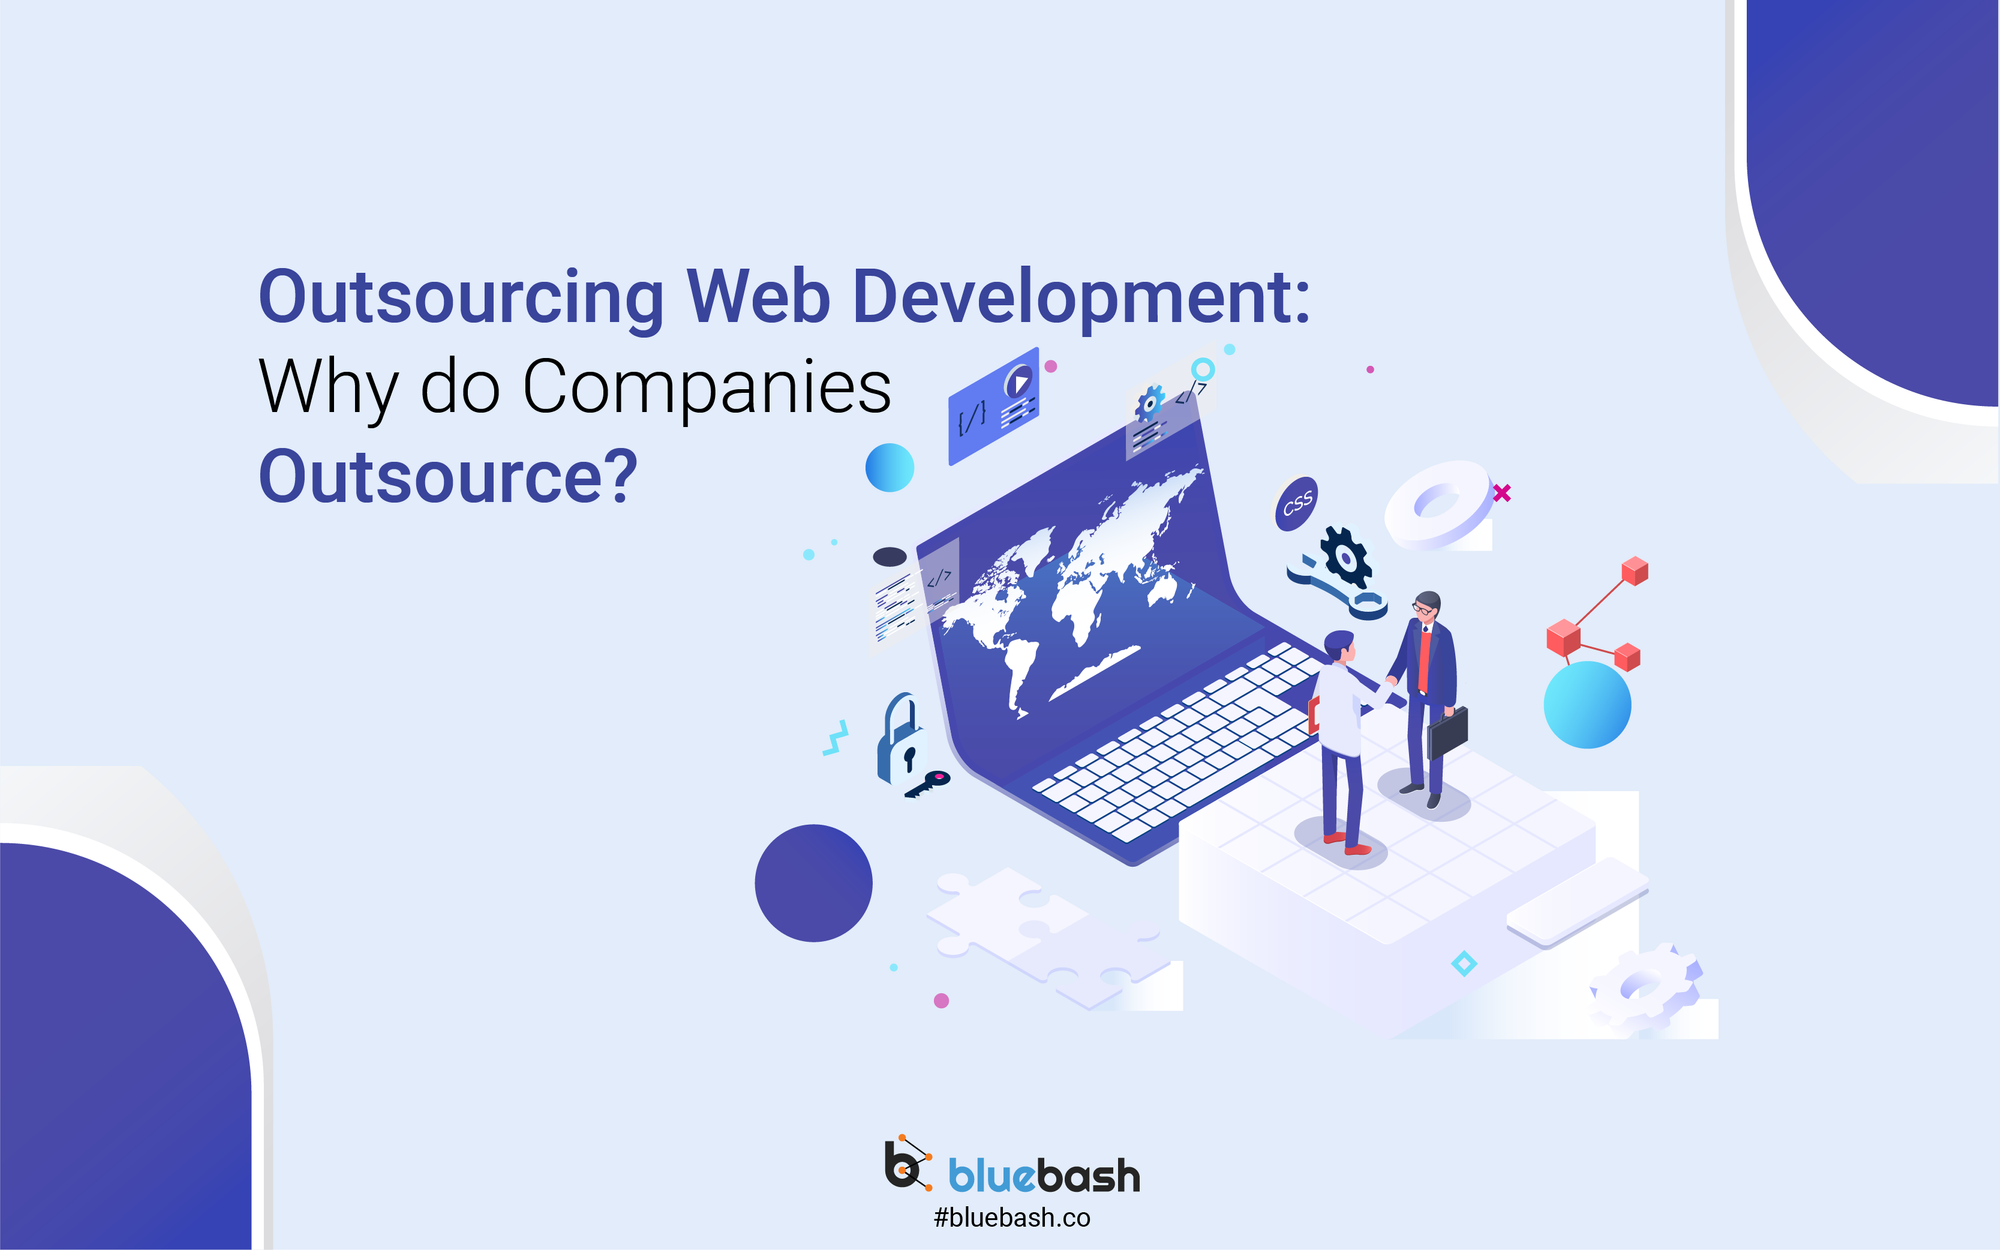 Outsourcing Web Development: Why do Companies Outsource?